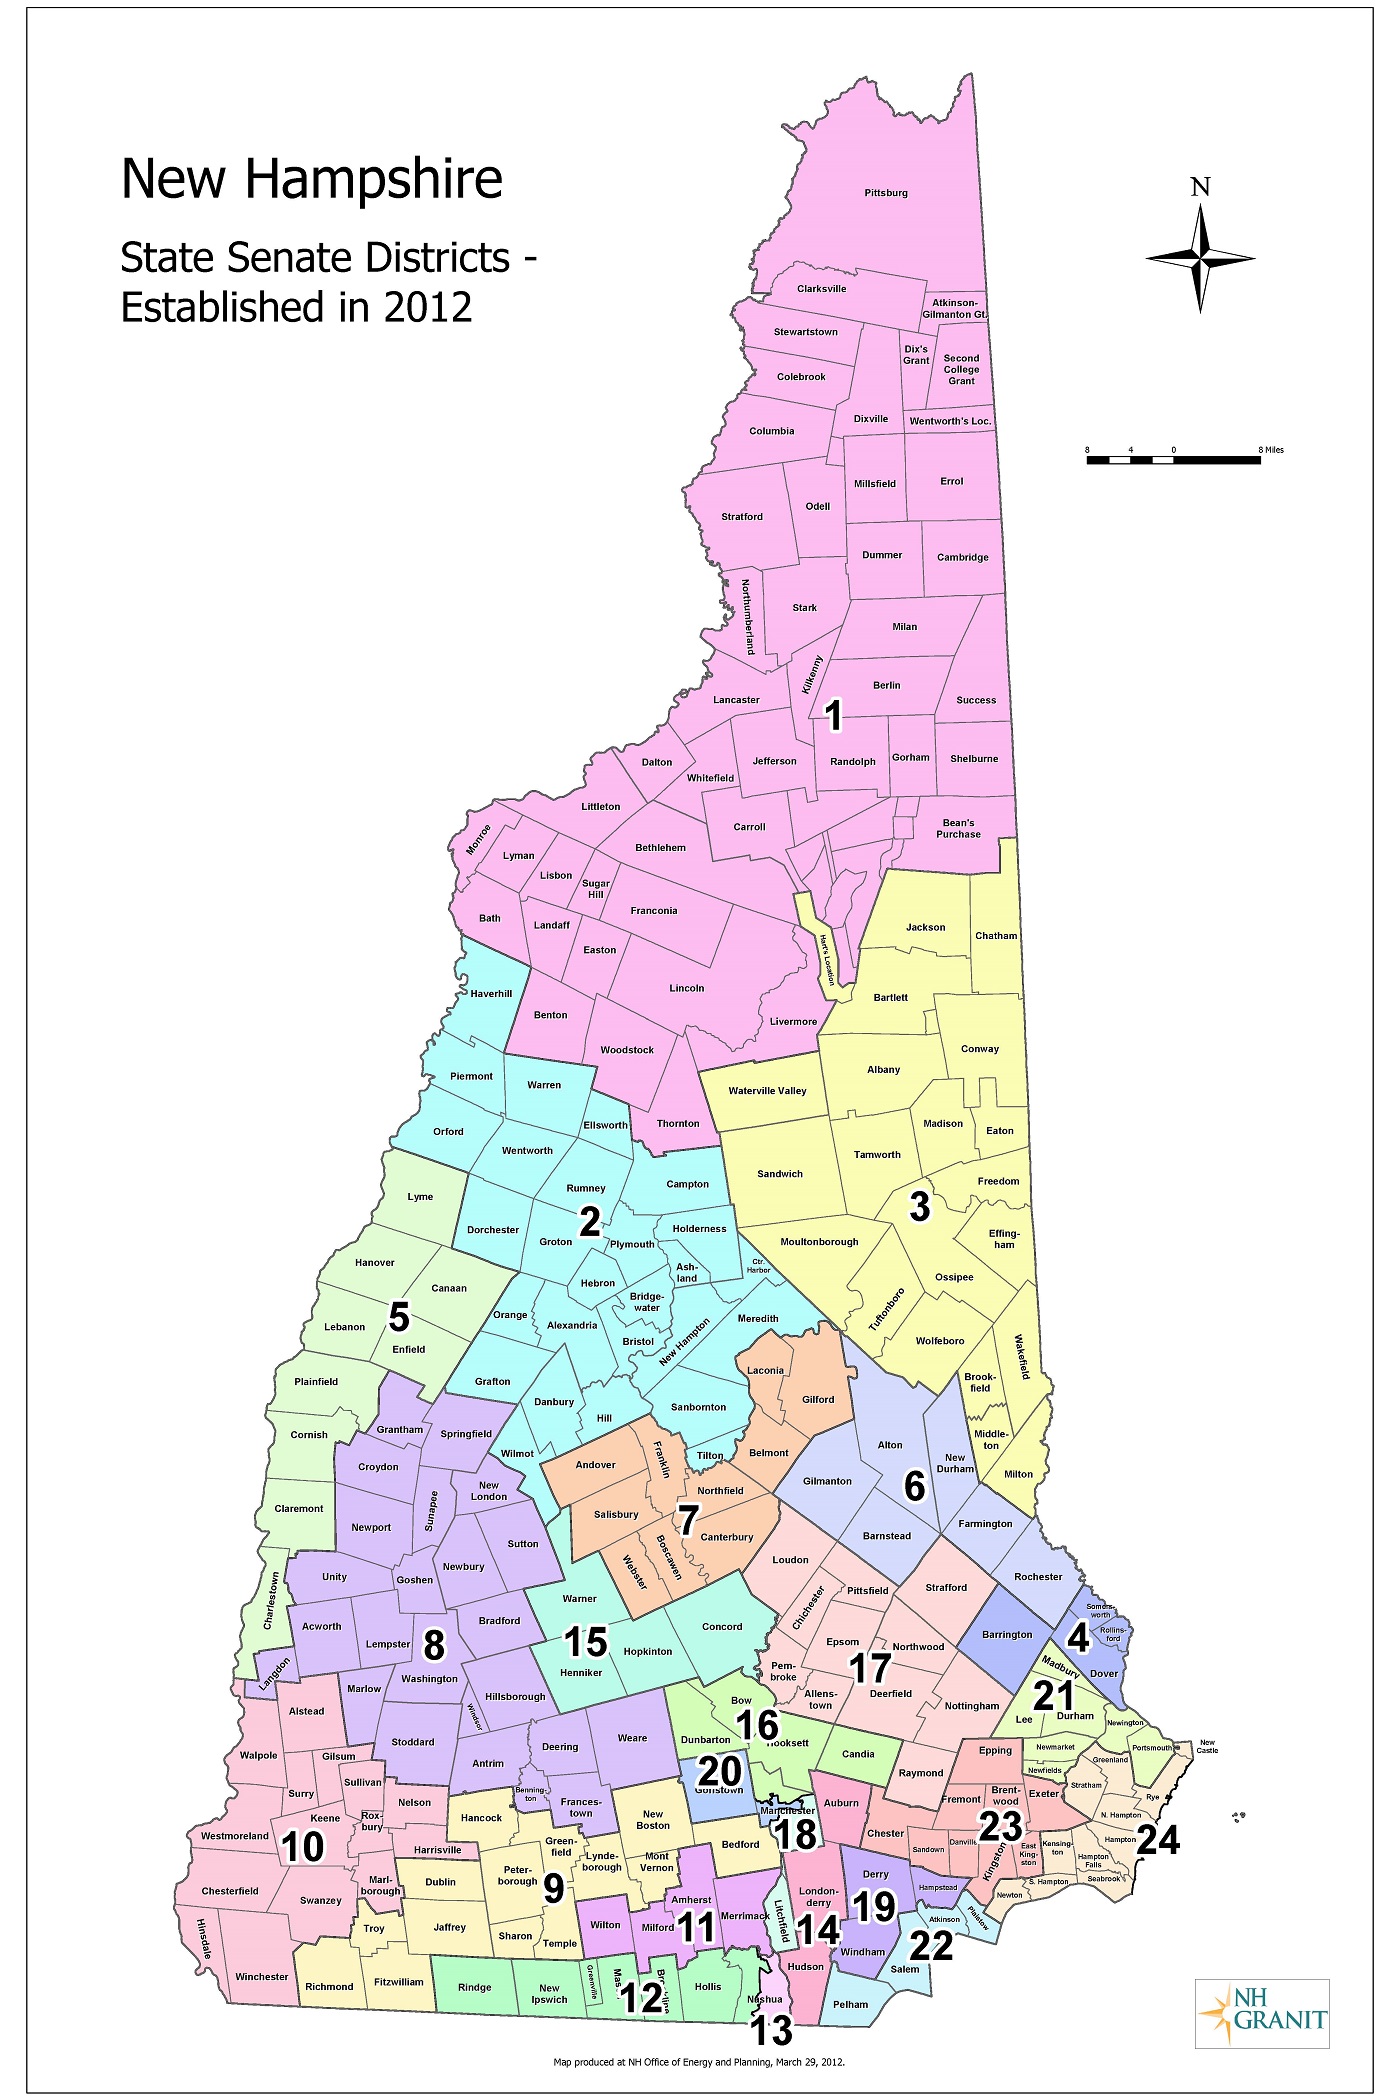 State redistricting information for New Hampshire